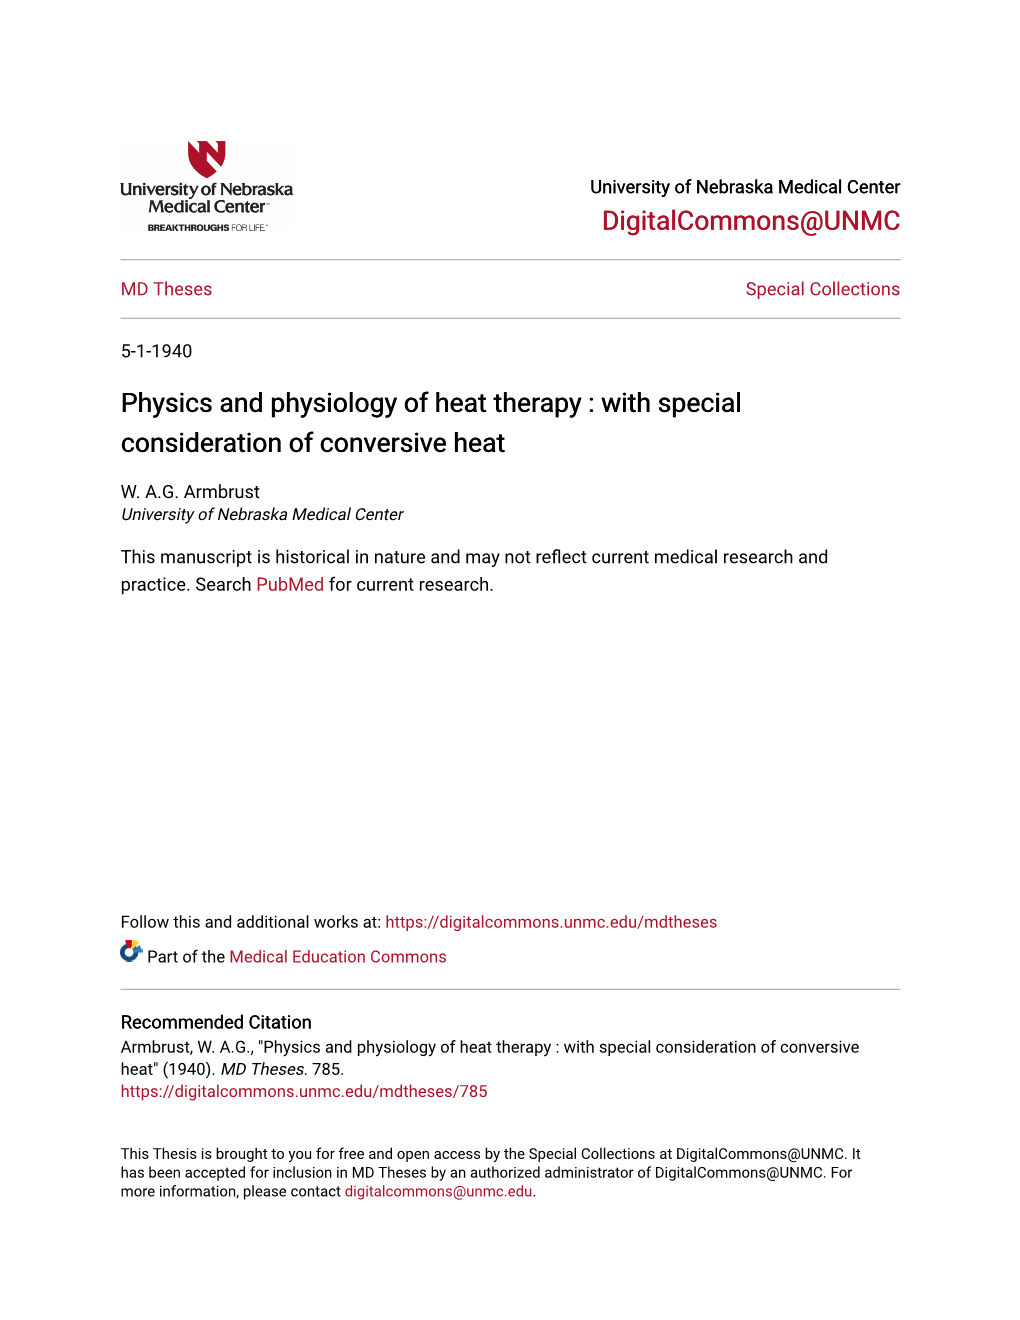 Physics and Physiology of Heat Therapy : with Special Consideration of Conversive Heat